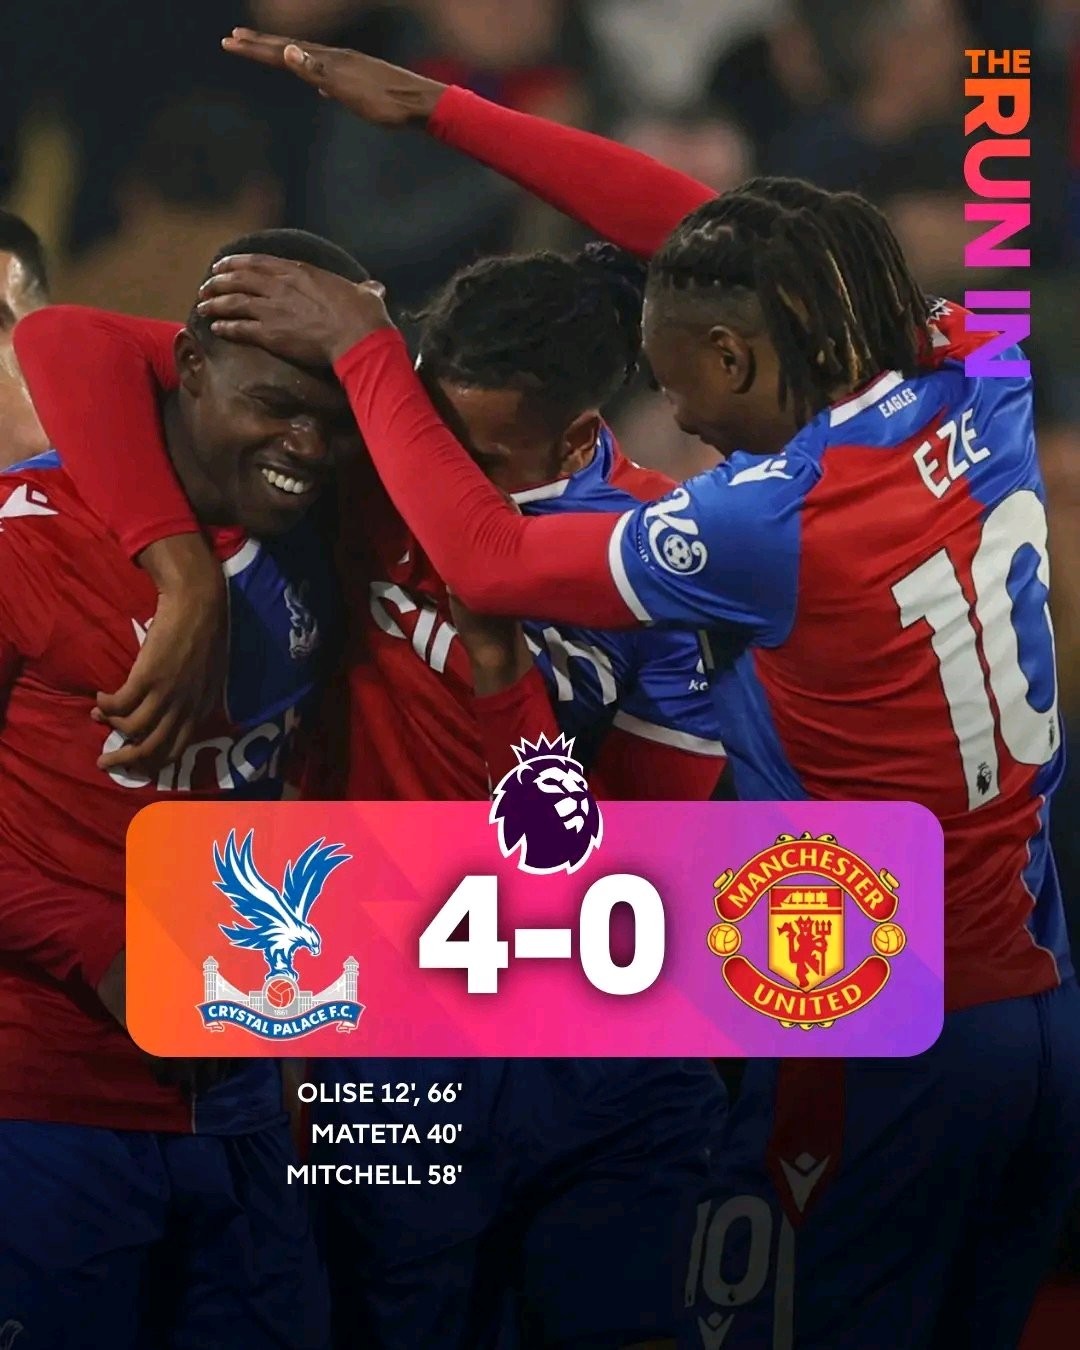 The Premier League's current table and match analysis following Manchester United's 4-0 loss to Crystal Palace